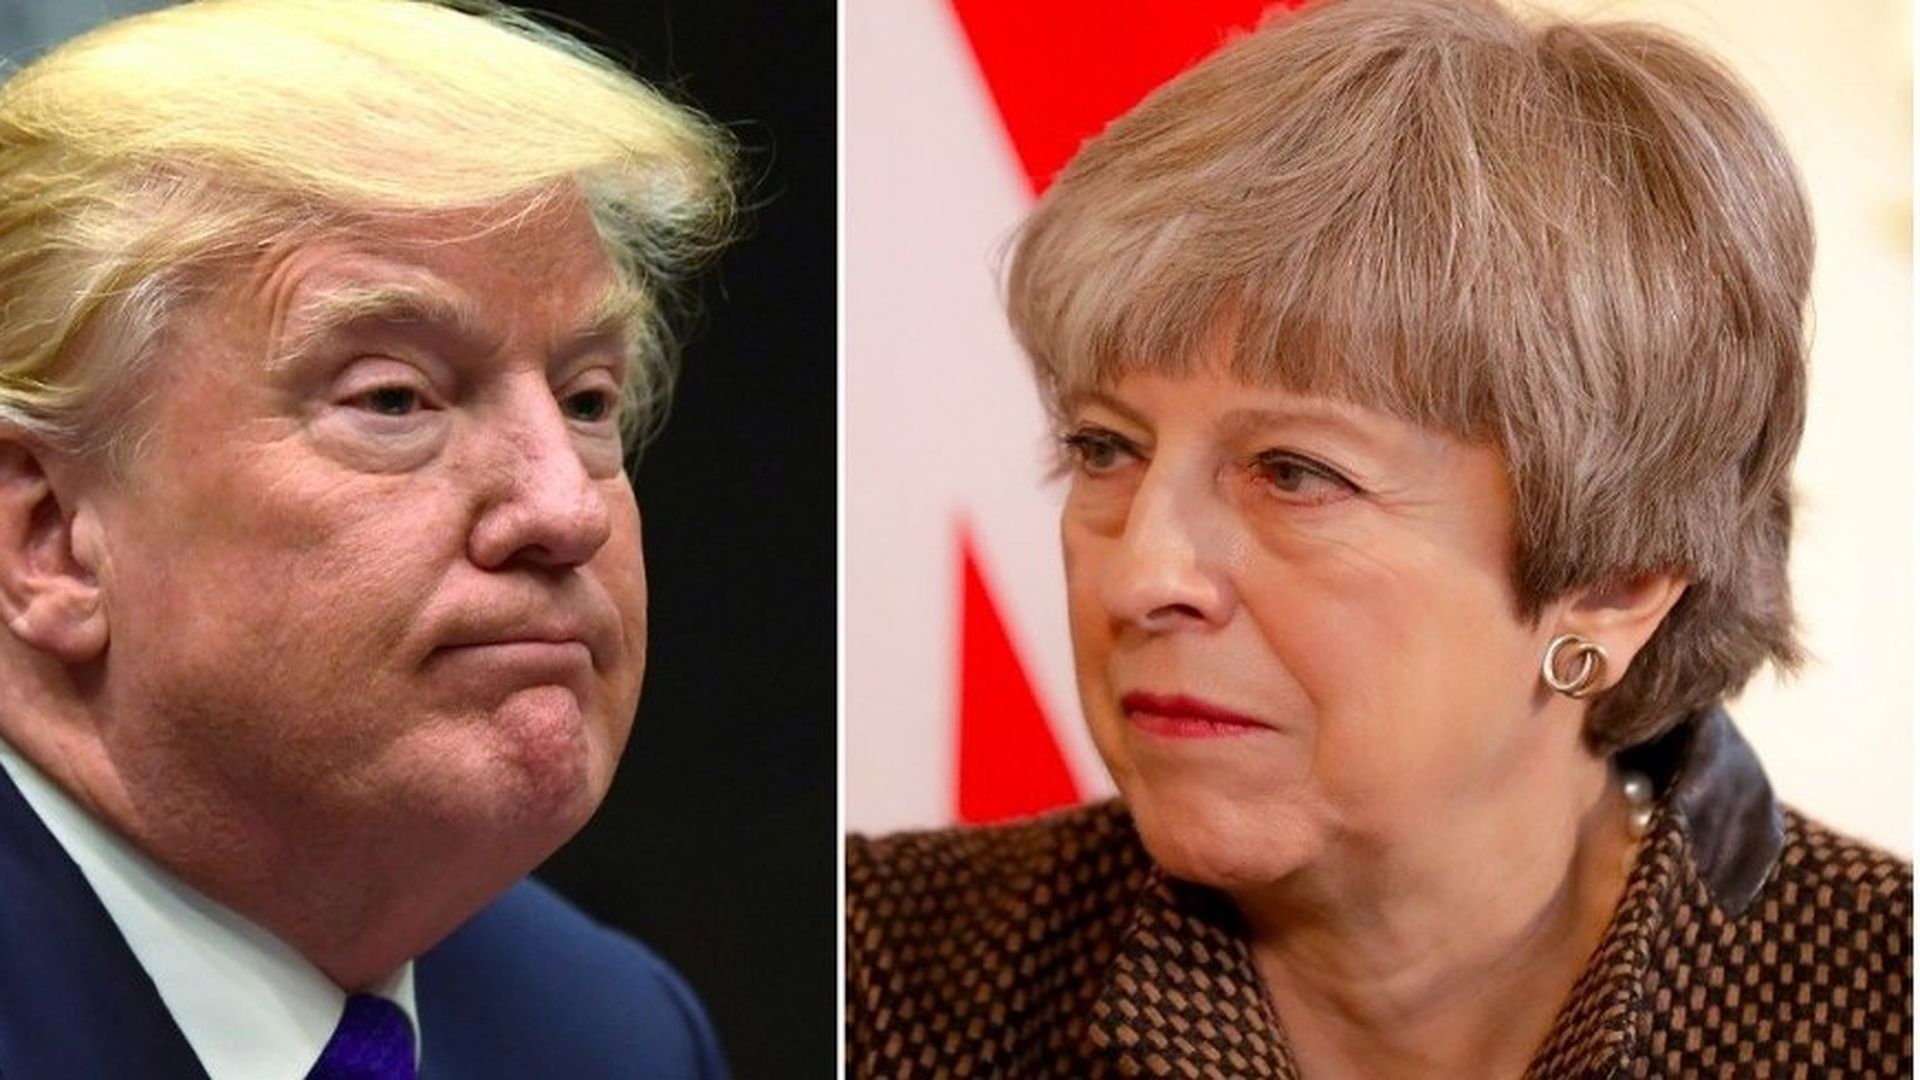 Trump and May speak for the first time since his anti-Muslim retweets - Axios